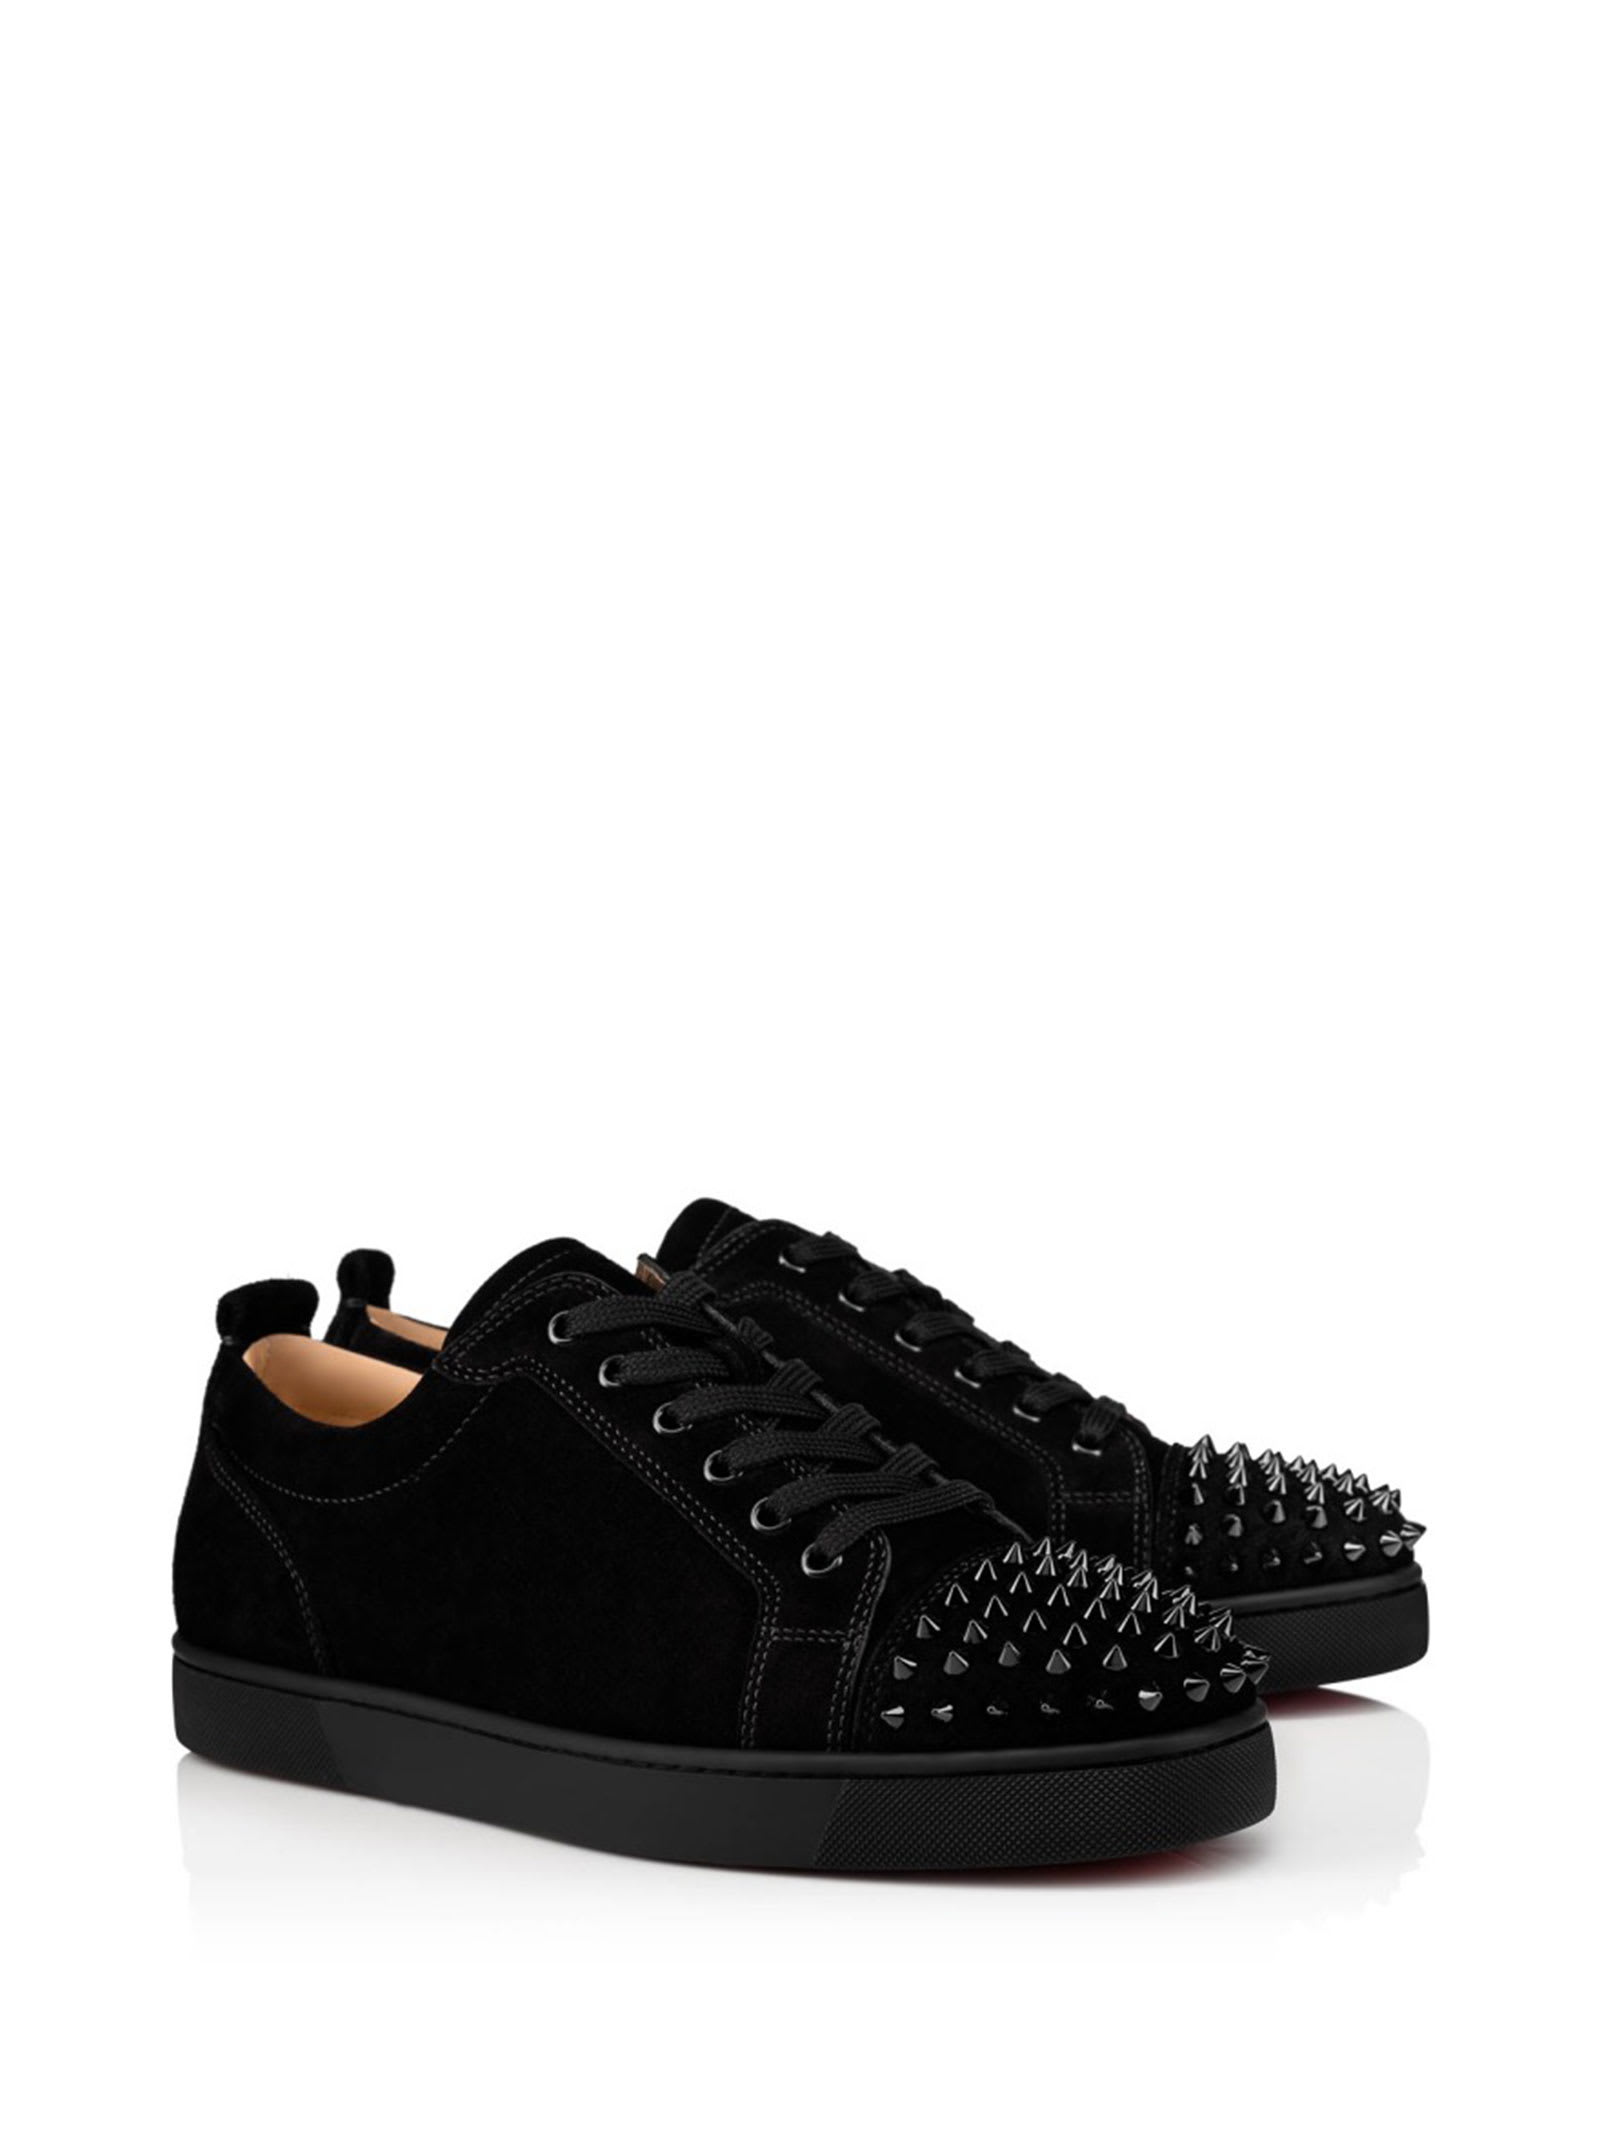 Shop Christian Louboutin Louis Sneakers With Spikes In Black Black